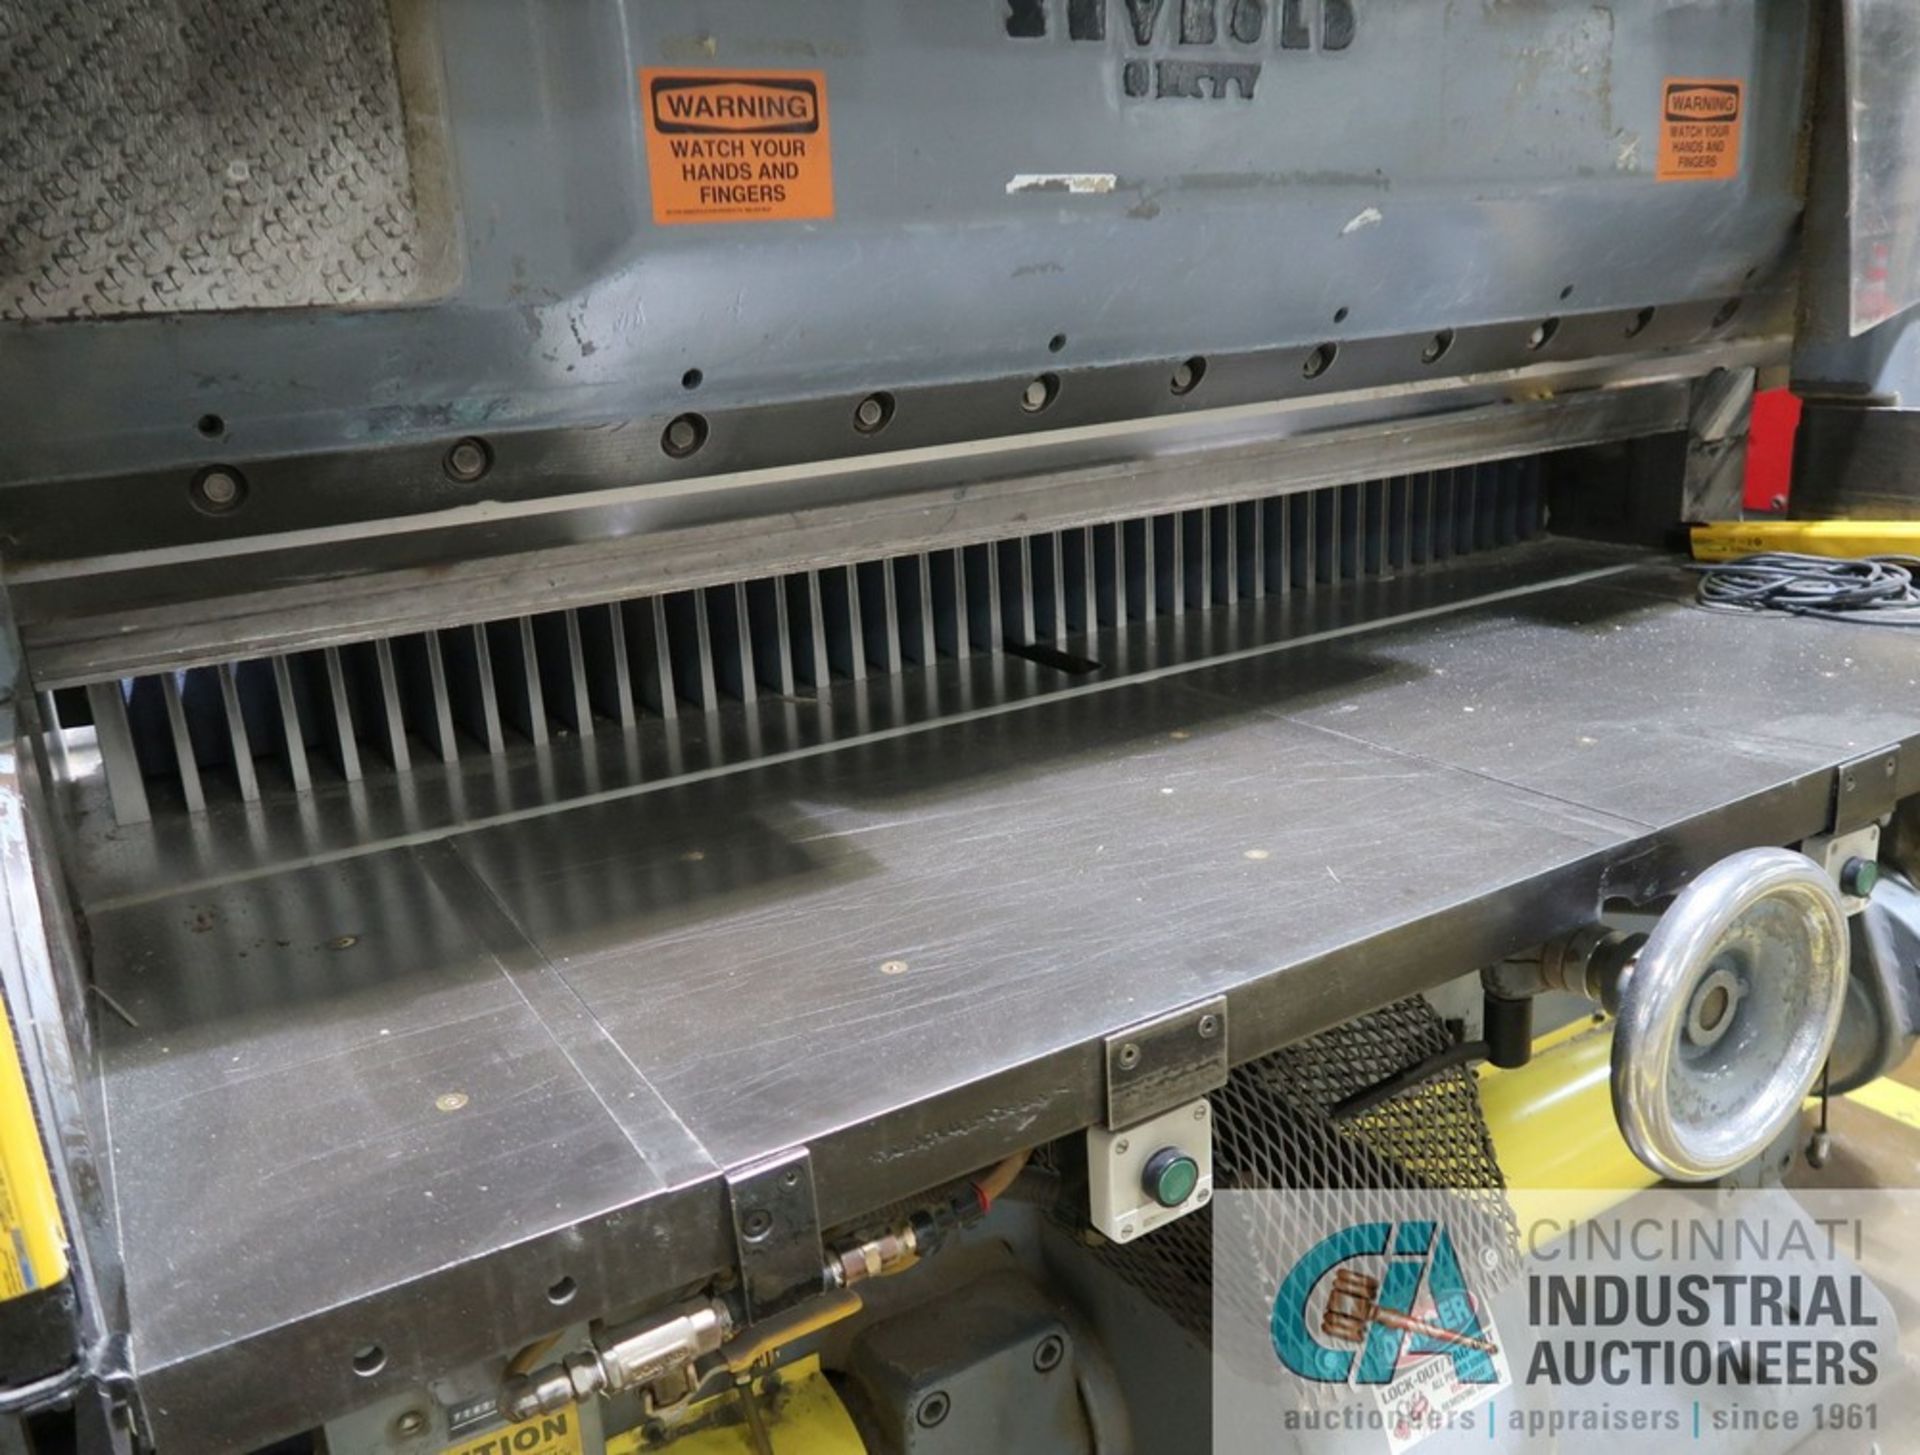 65" SEYBOLD MODEL CFF-P PAPER CUTTER; S/N CFF-524, WITH 92) SAFETY CLOSURES RAKE BACKSTOP, FOOT - Image 10 of 16